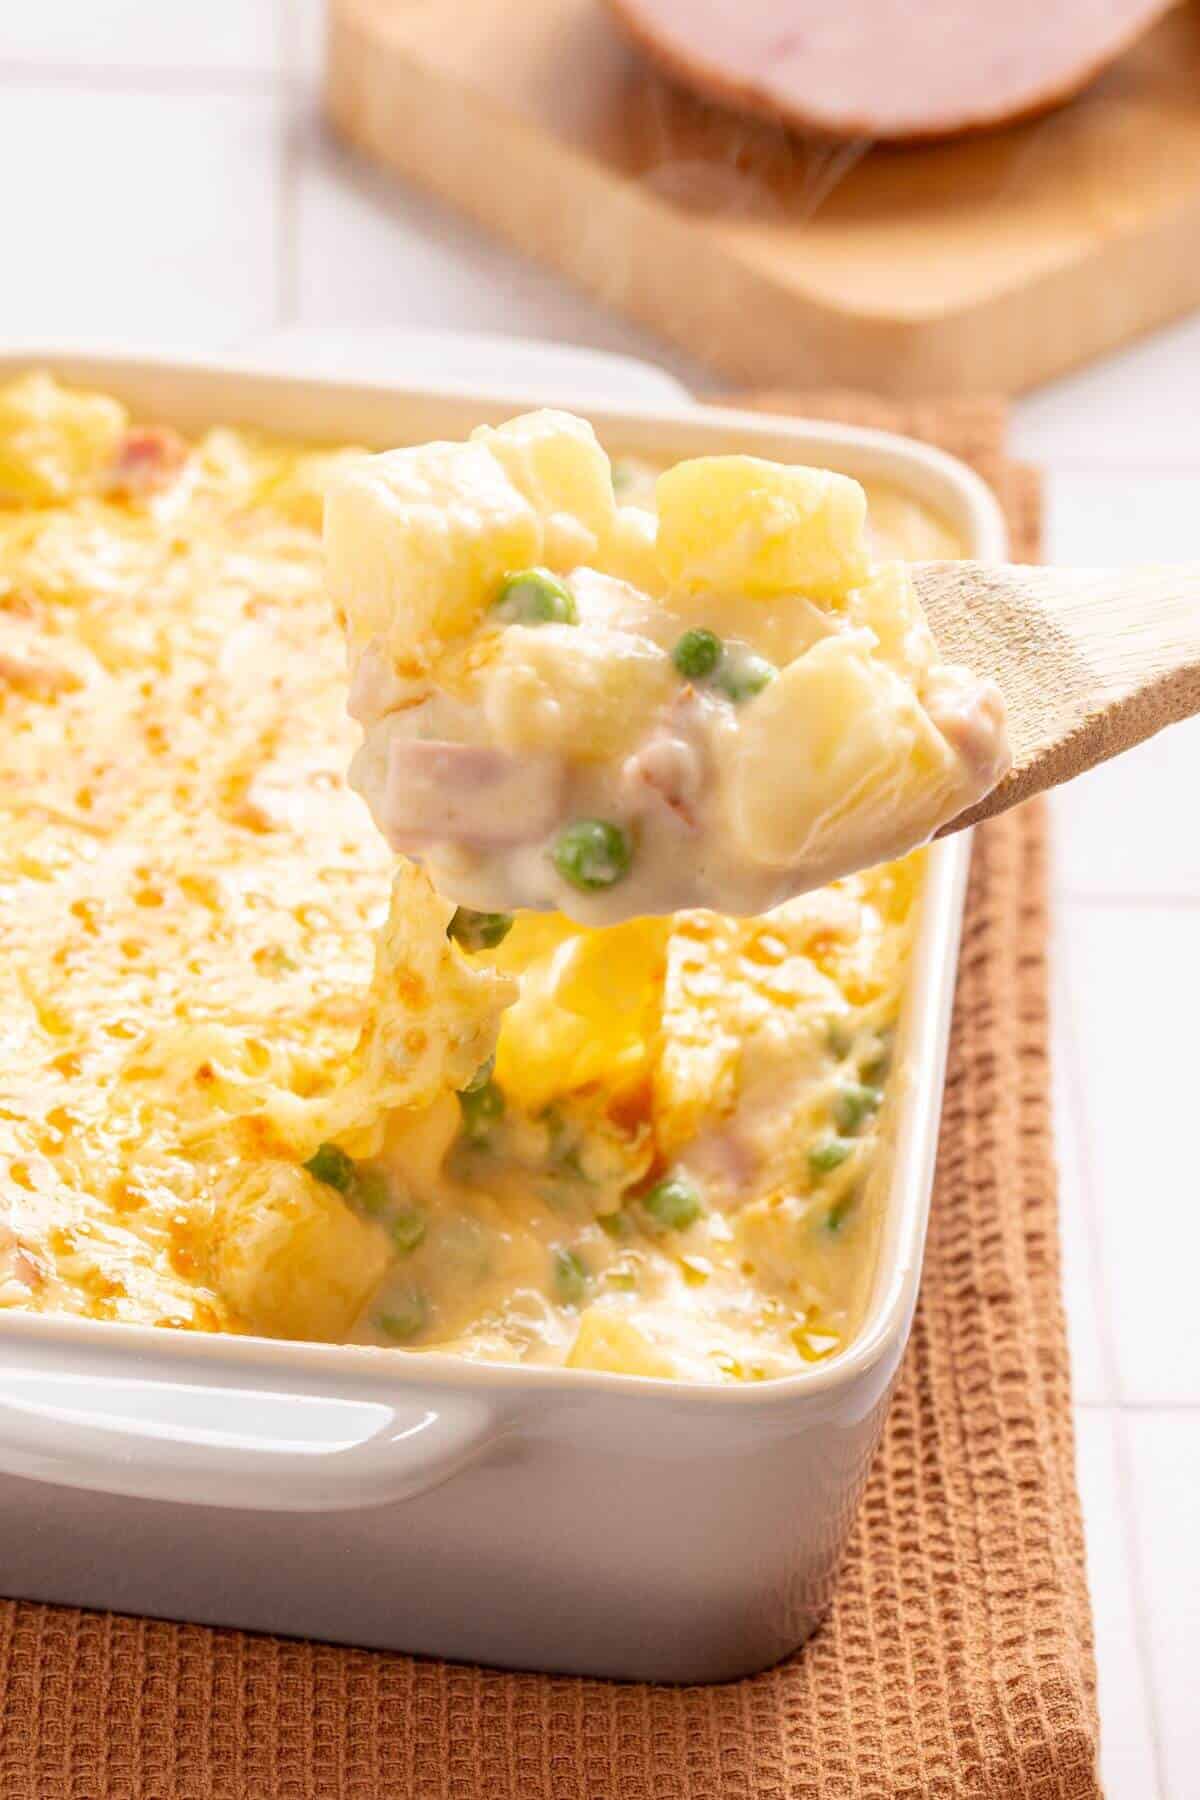 A spoon lifting a serving of creamy ham and potato casserole with corn, peas, and melted cheese from a white baking dish, with sliced ham in the background.